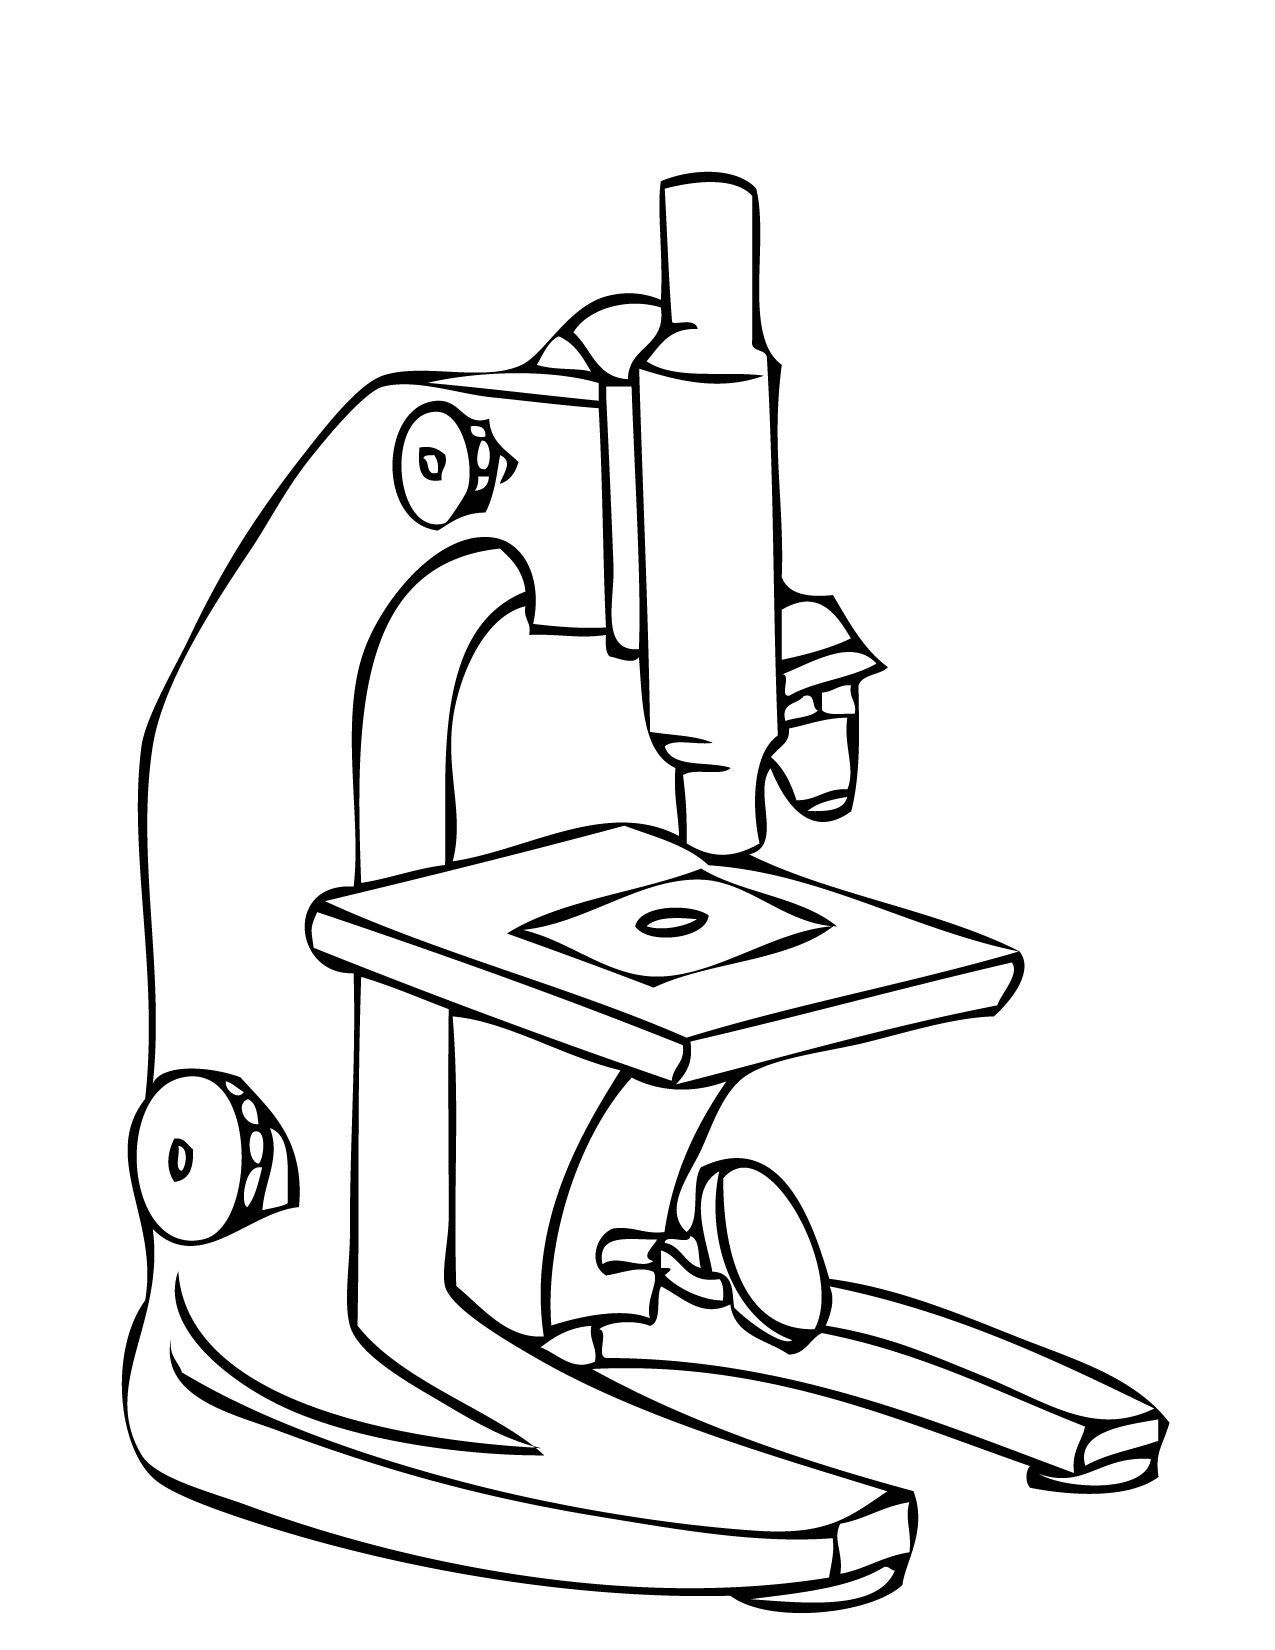 Images For > Microscope Clip Art